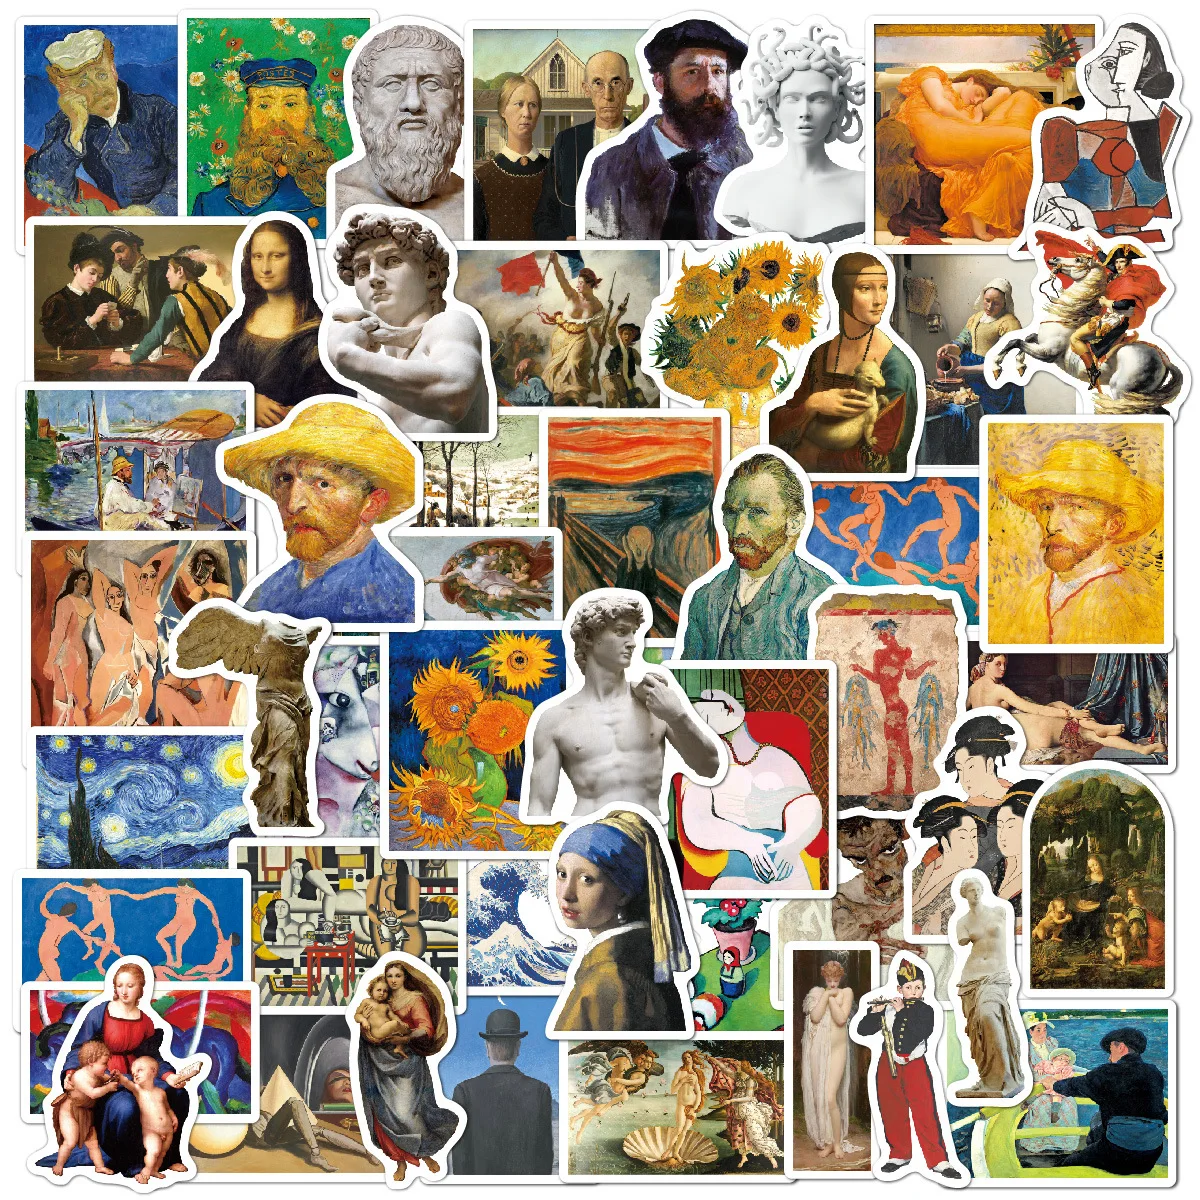 52 Piece Not Repeat Sticker Oil Painting Art Van Gogh Mona Lisa Stickers For Car Guitar Laptop Macbook Luggage Skateboard Decals